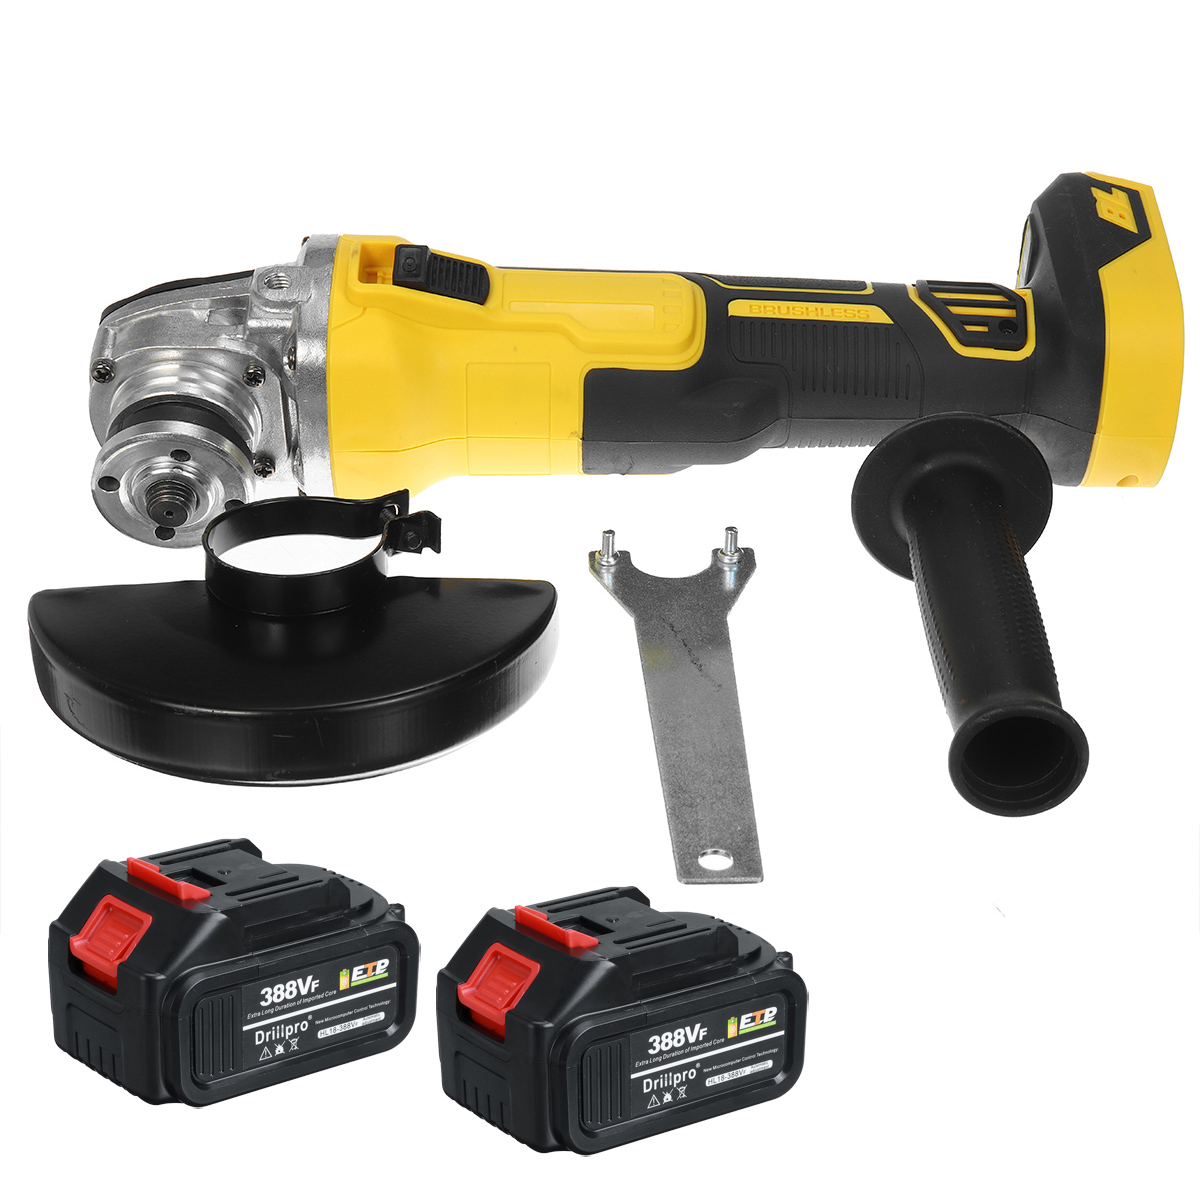 Drillpro-388VF-100mm125mm-Brushless-Angle-Grinder-Wireless-Rechargeable-Wood-Metal-Cutting-Polishing-1874664-9